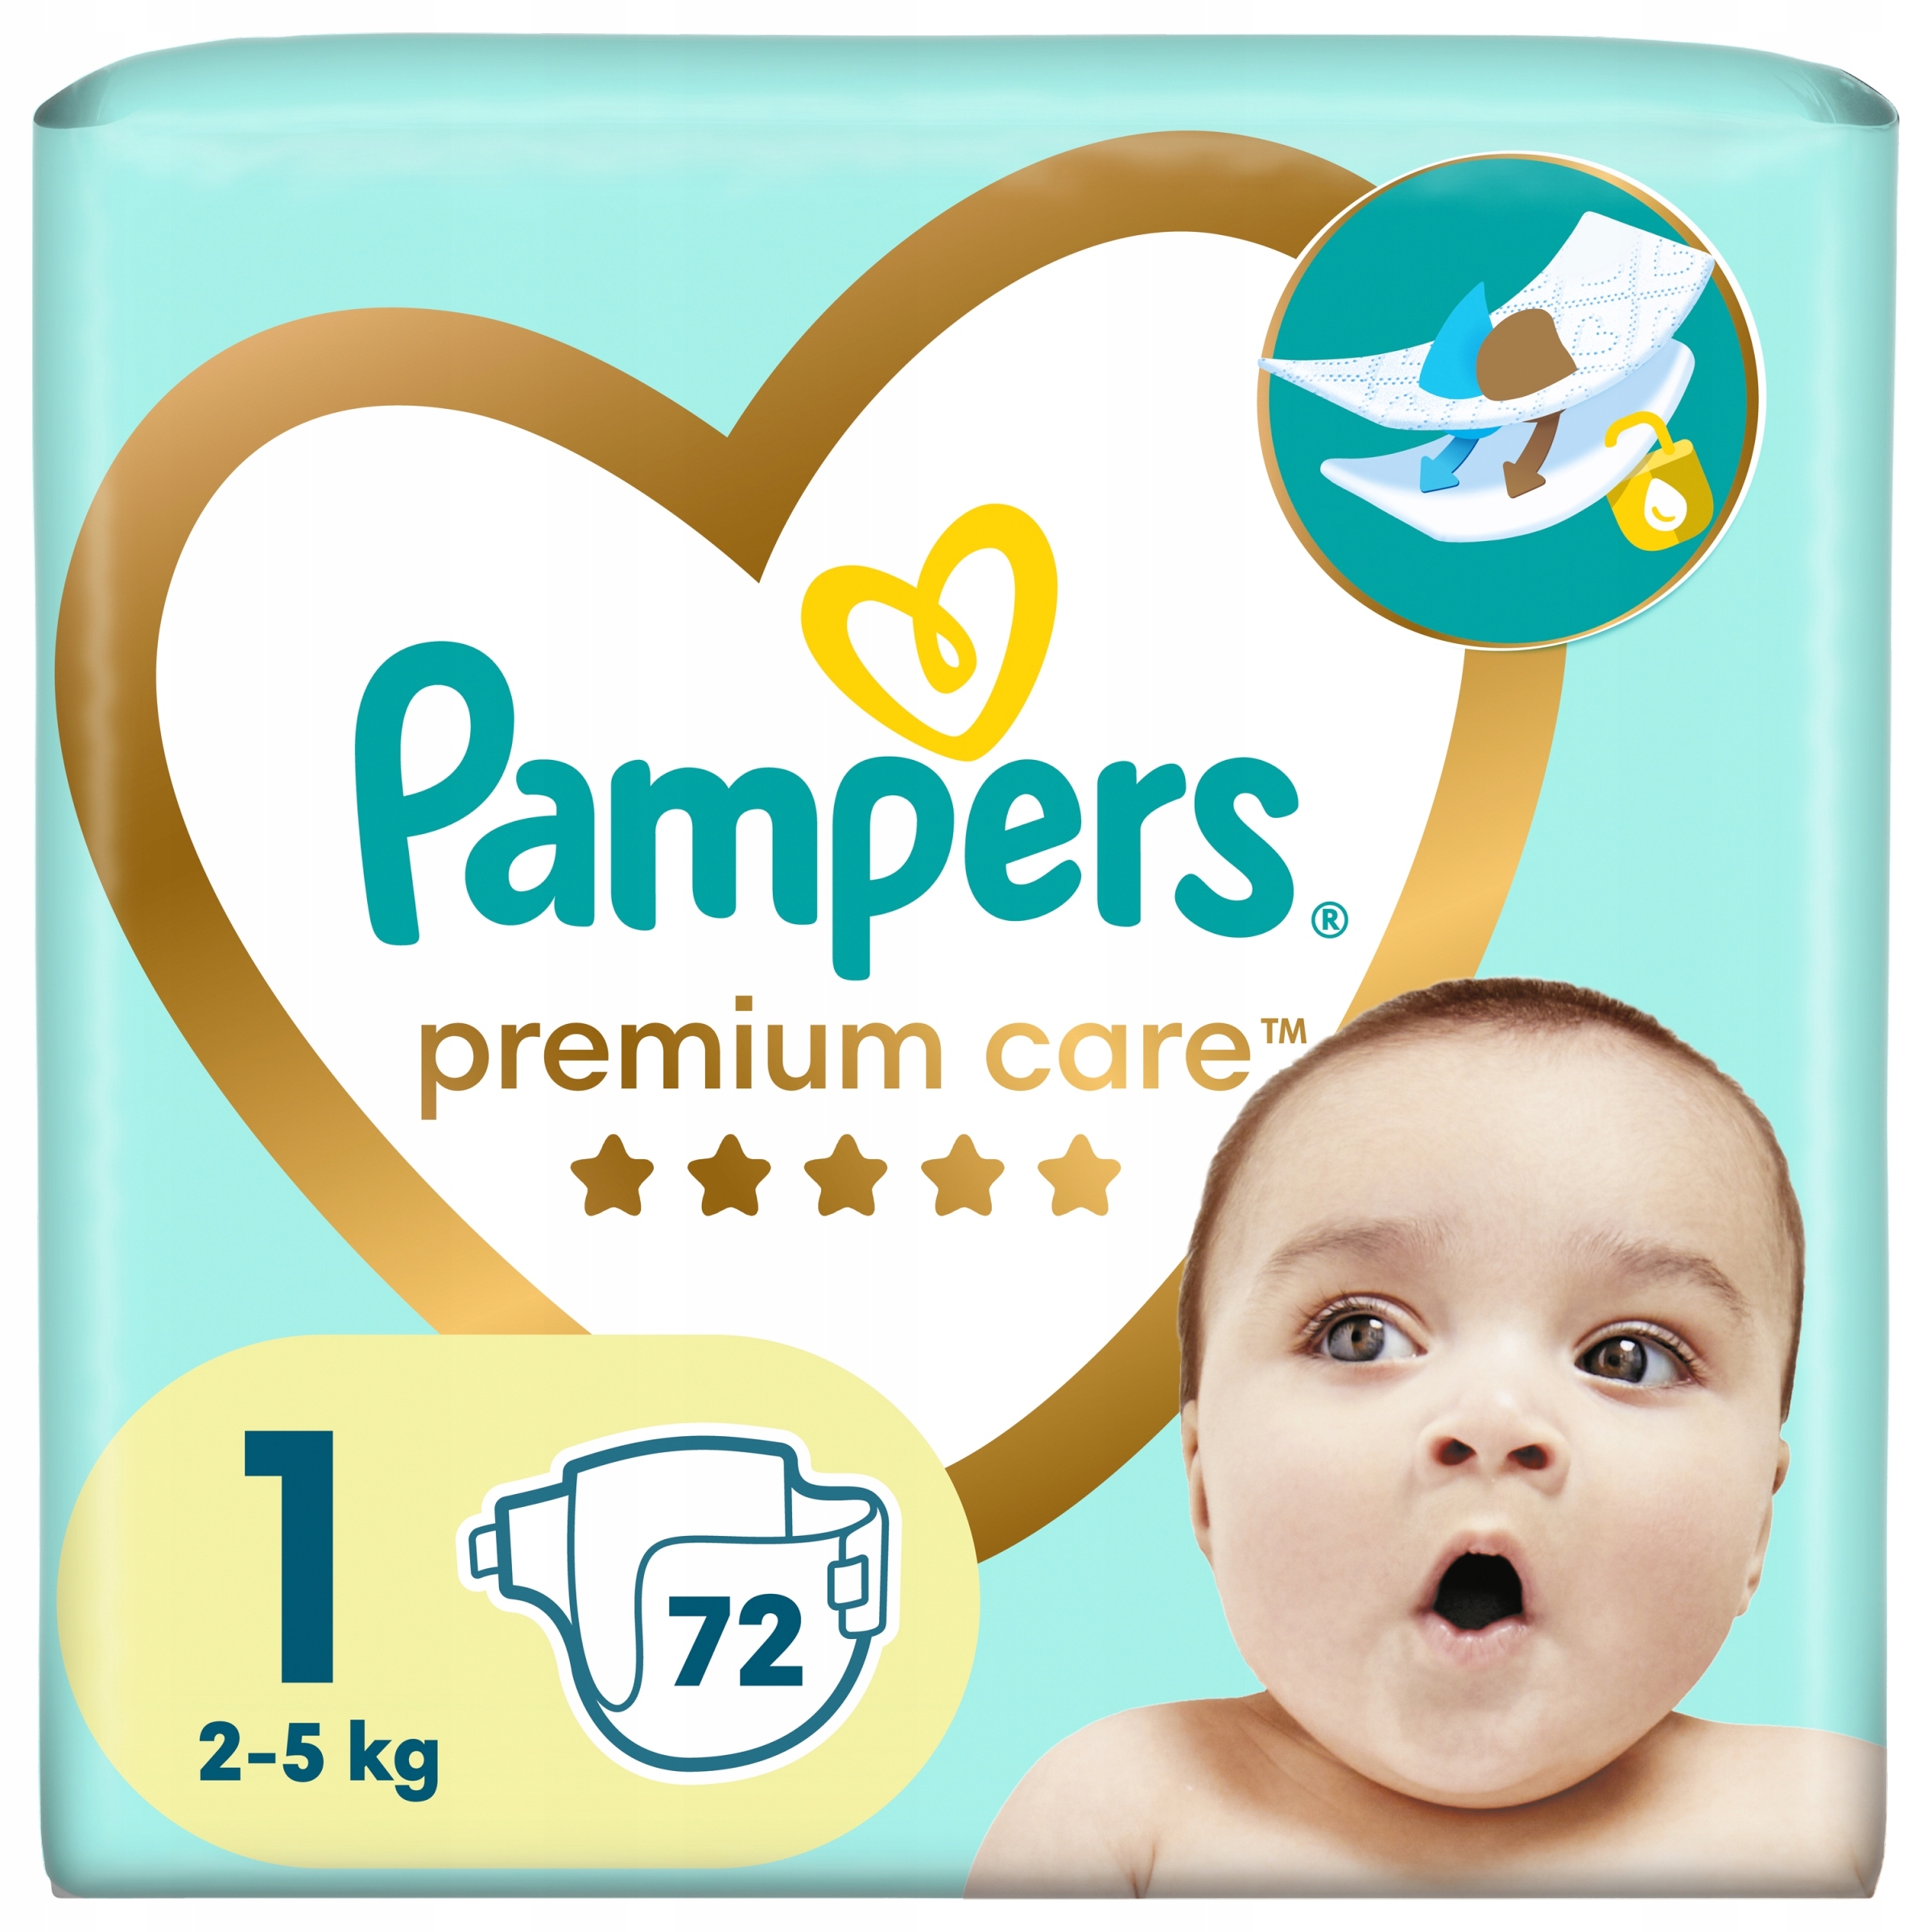 pampers newborn diapers